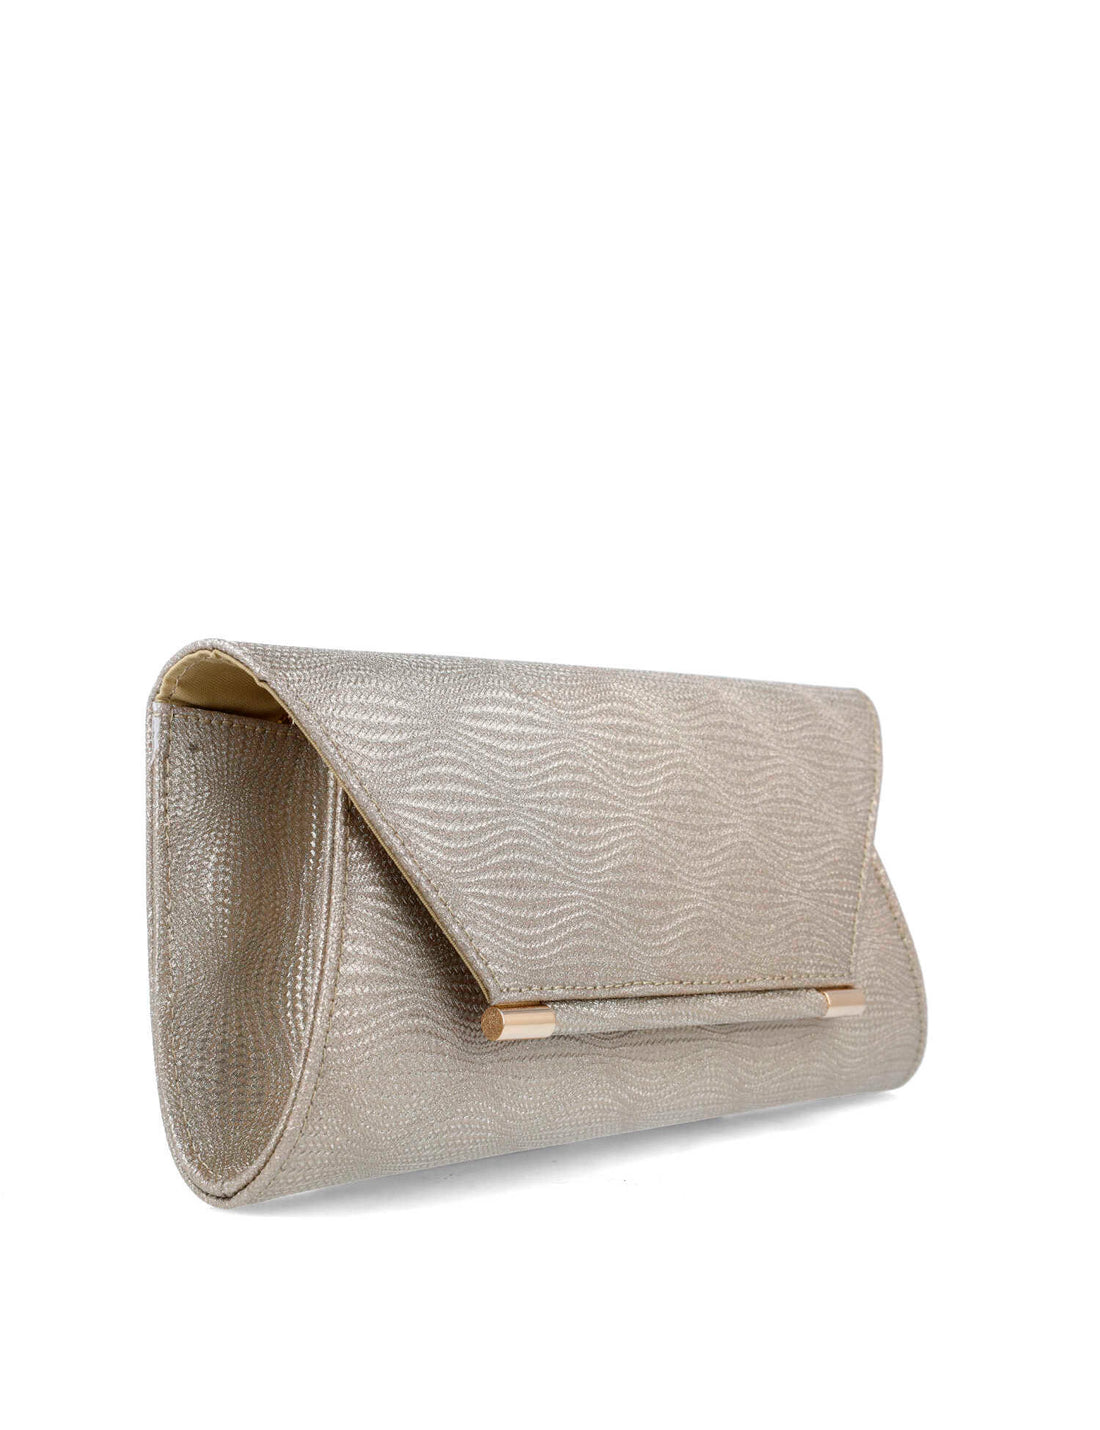 Beige Clutch With Gold Hardware_85642_00_02